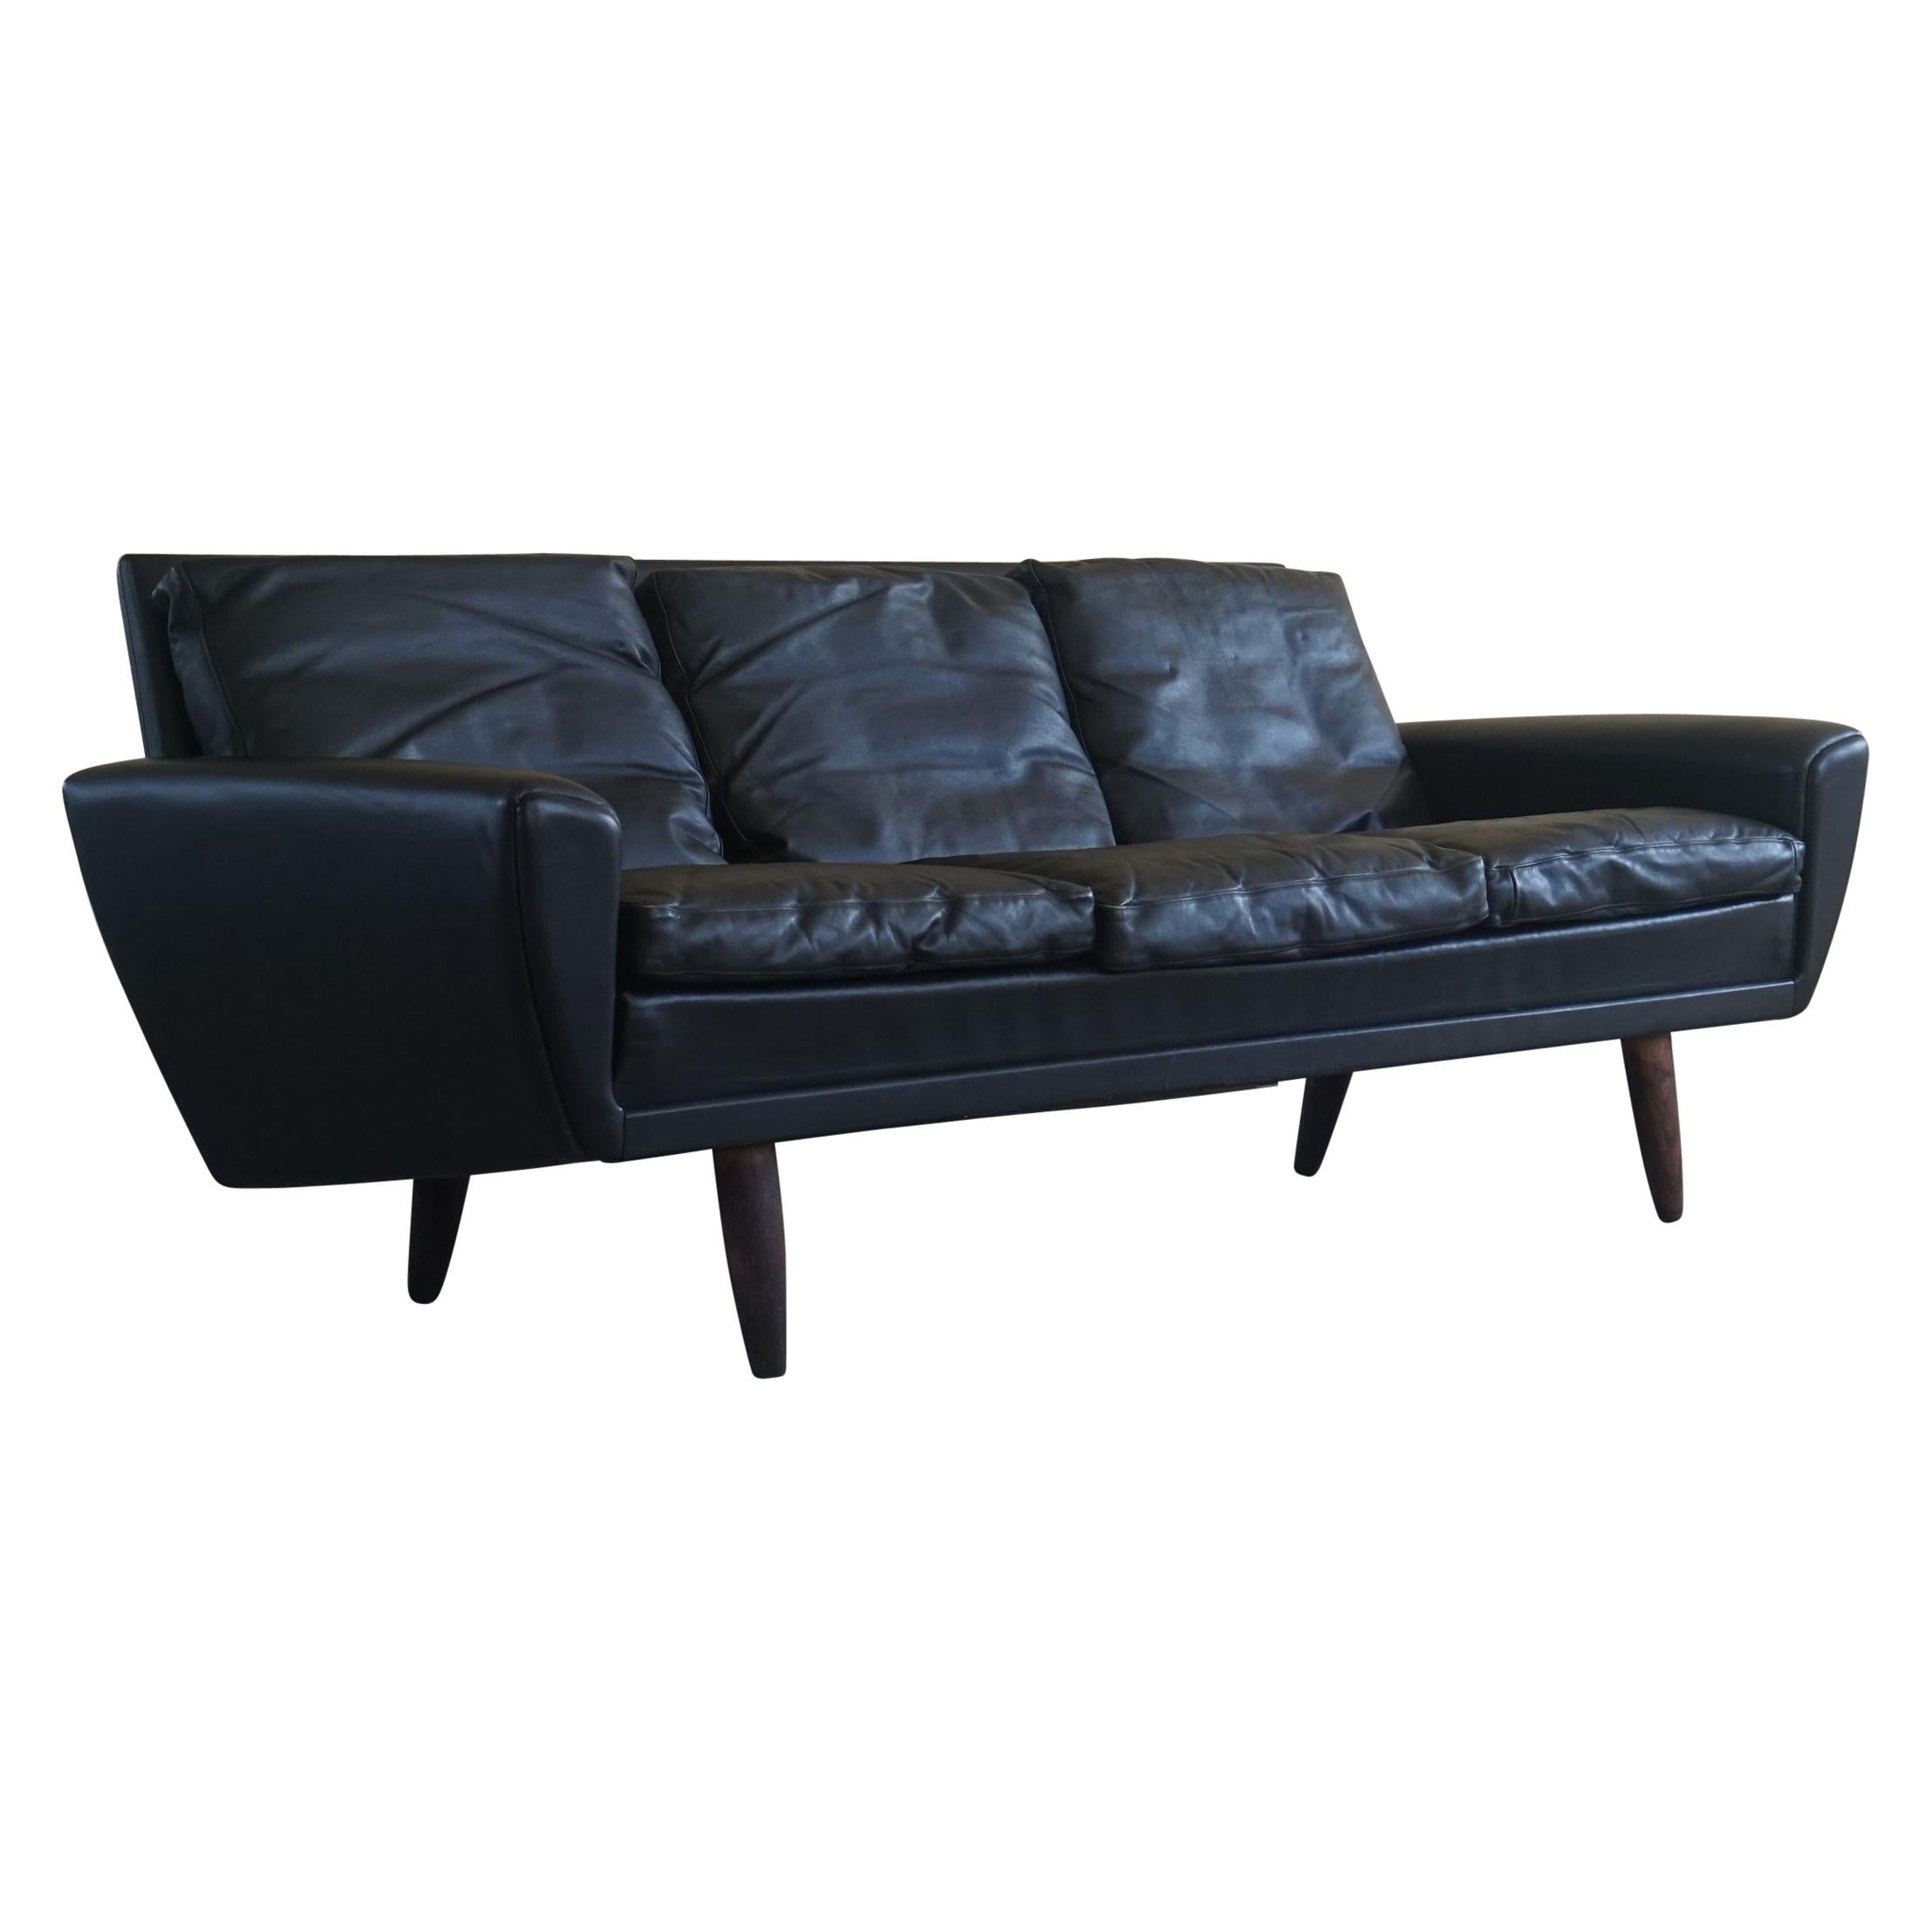 Danish Modern Sofa by Georg Thams in Black Leather and Rosewood Legs, 1964